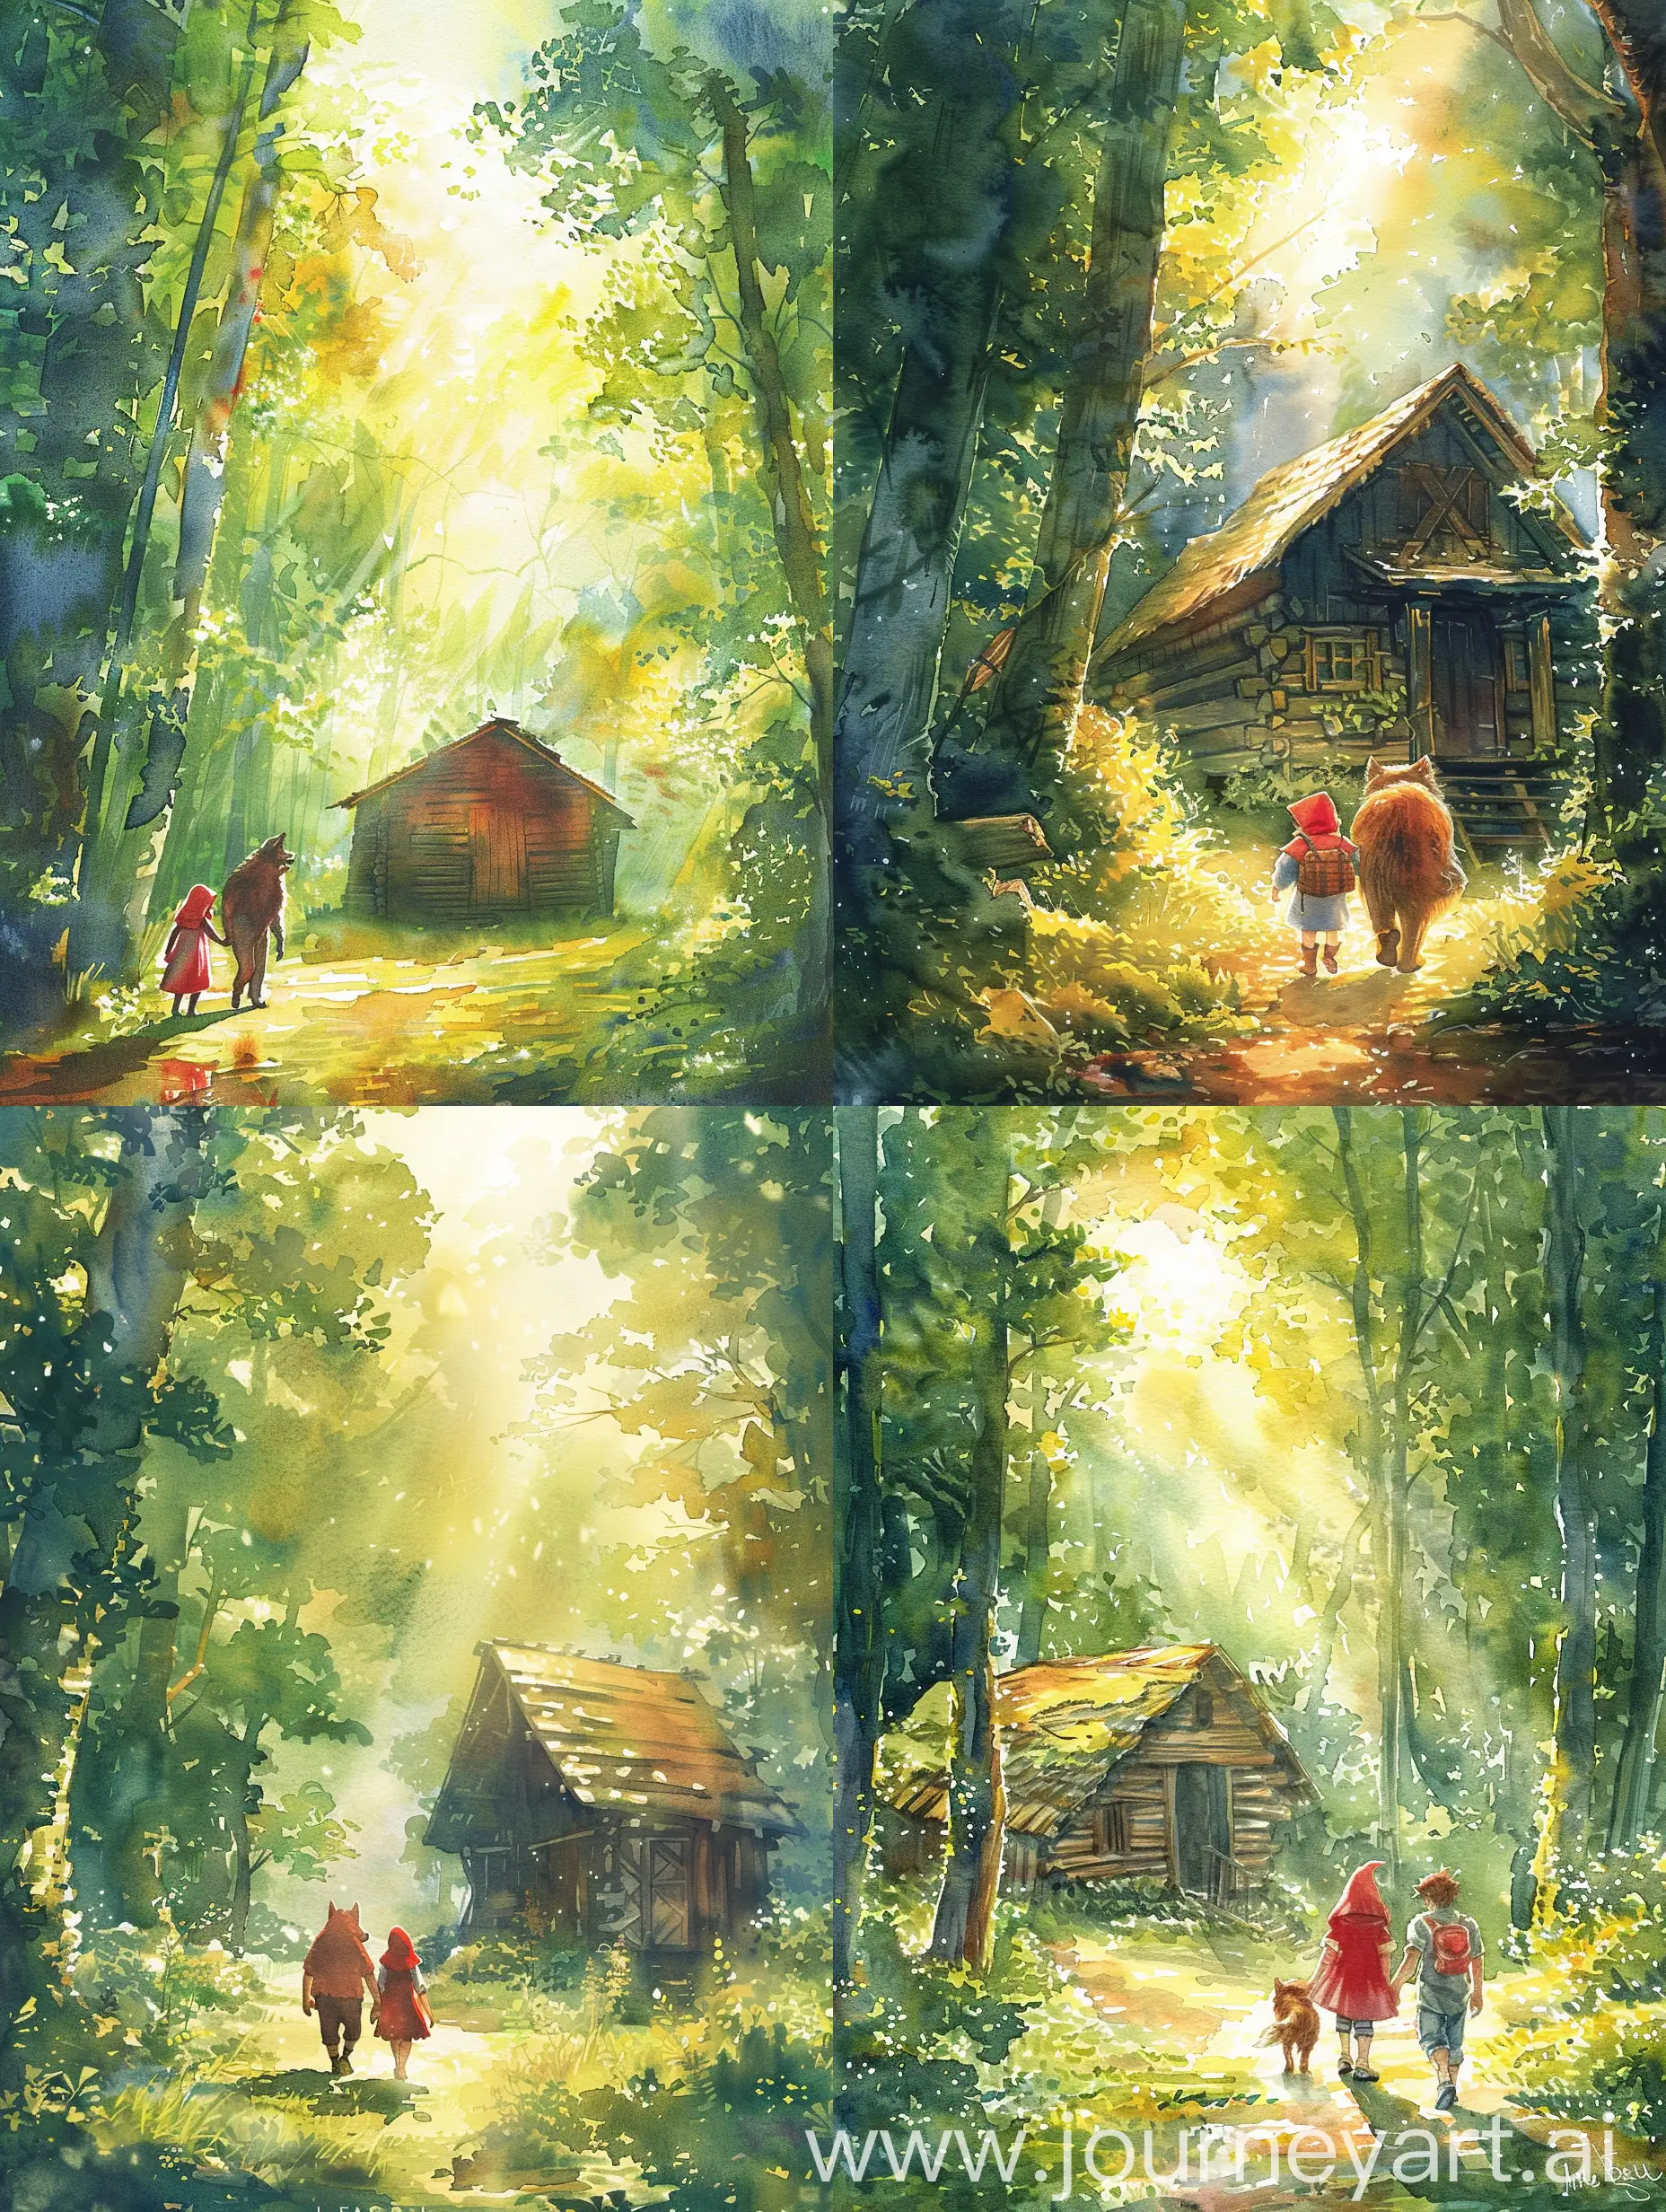 Little-Red-Riding-Hood-and-the-Big-Bad-Wolf-Walking-Towards-a-Wooden-House-in-Sunlit-Forest